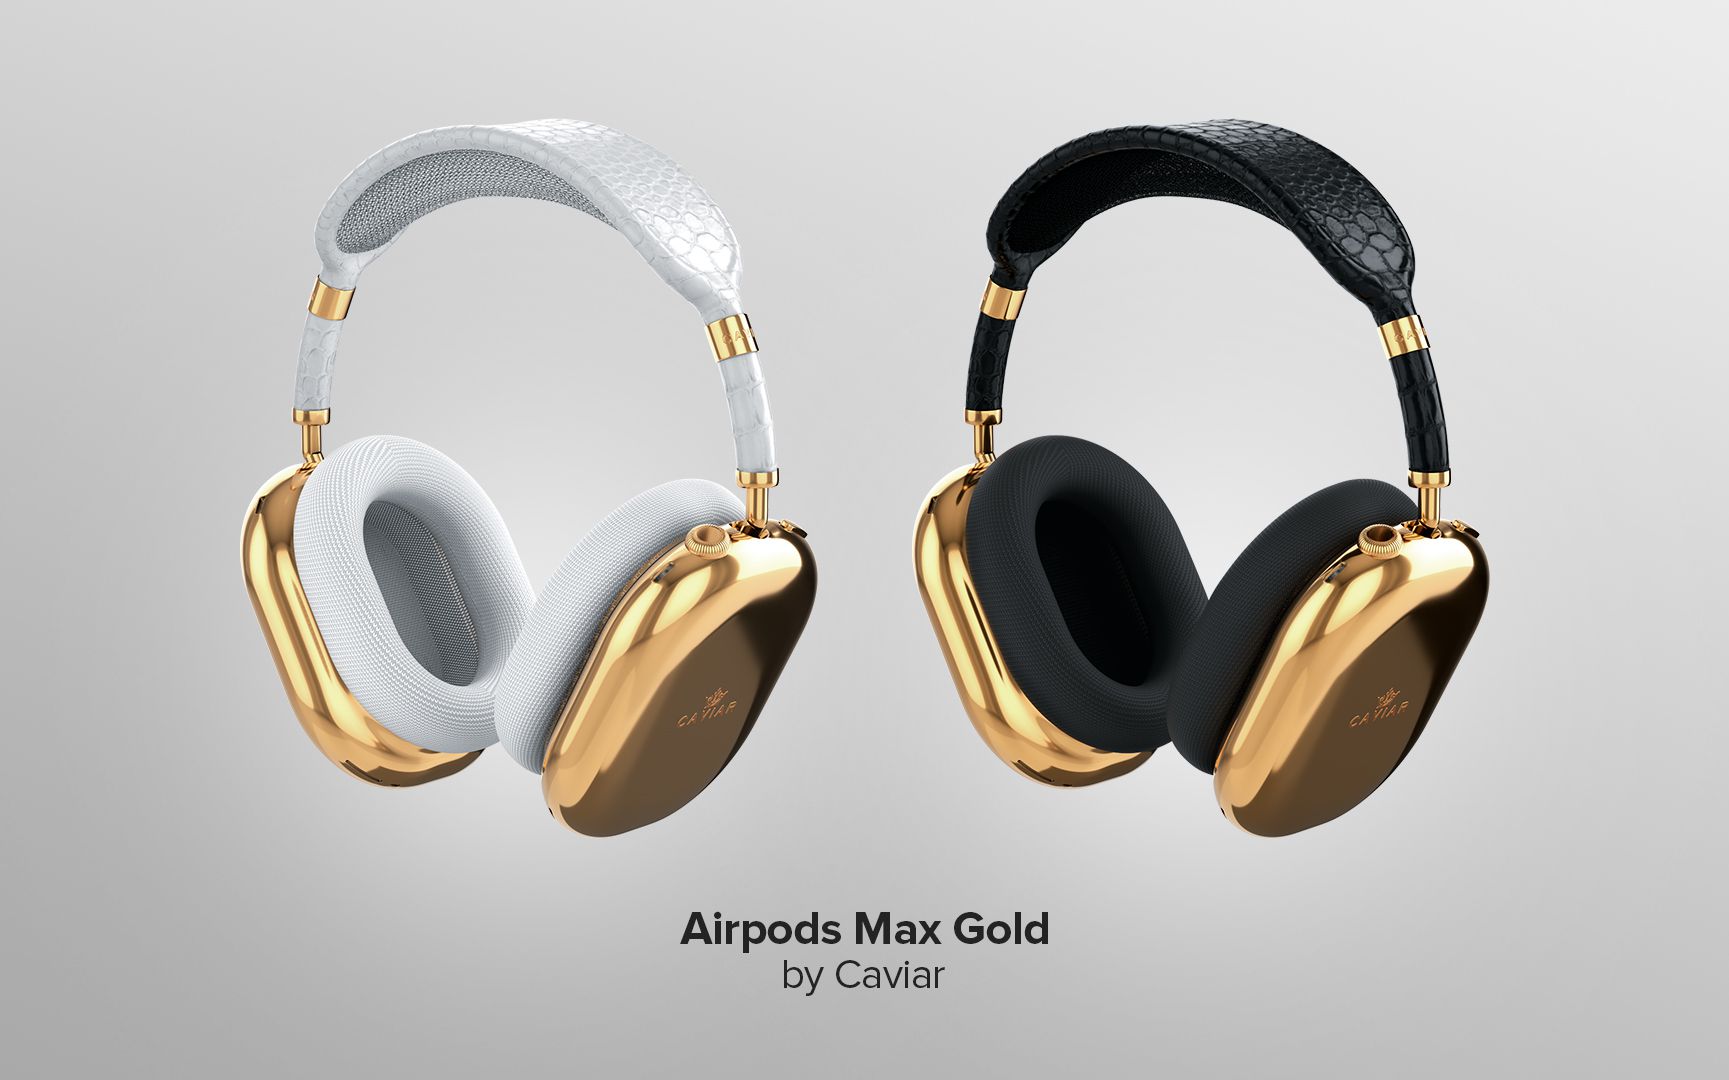 Caviar presents personalized ‘Pure Gold’ AirPods for $ 108,000